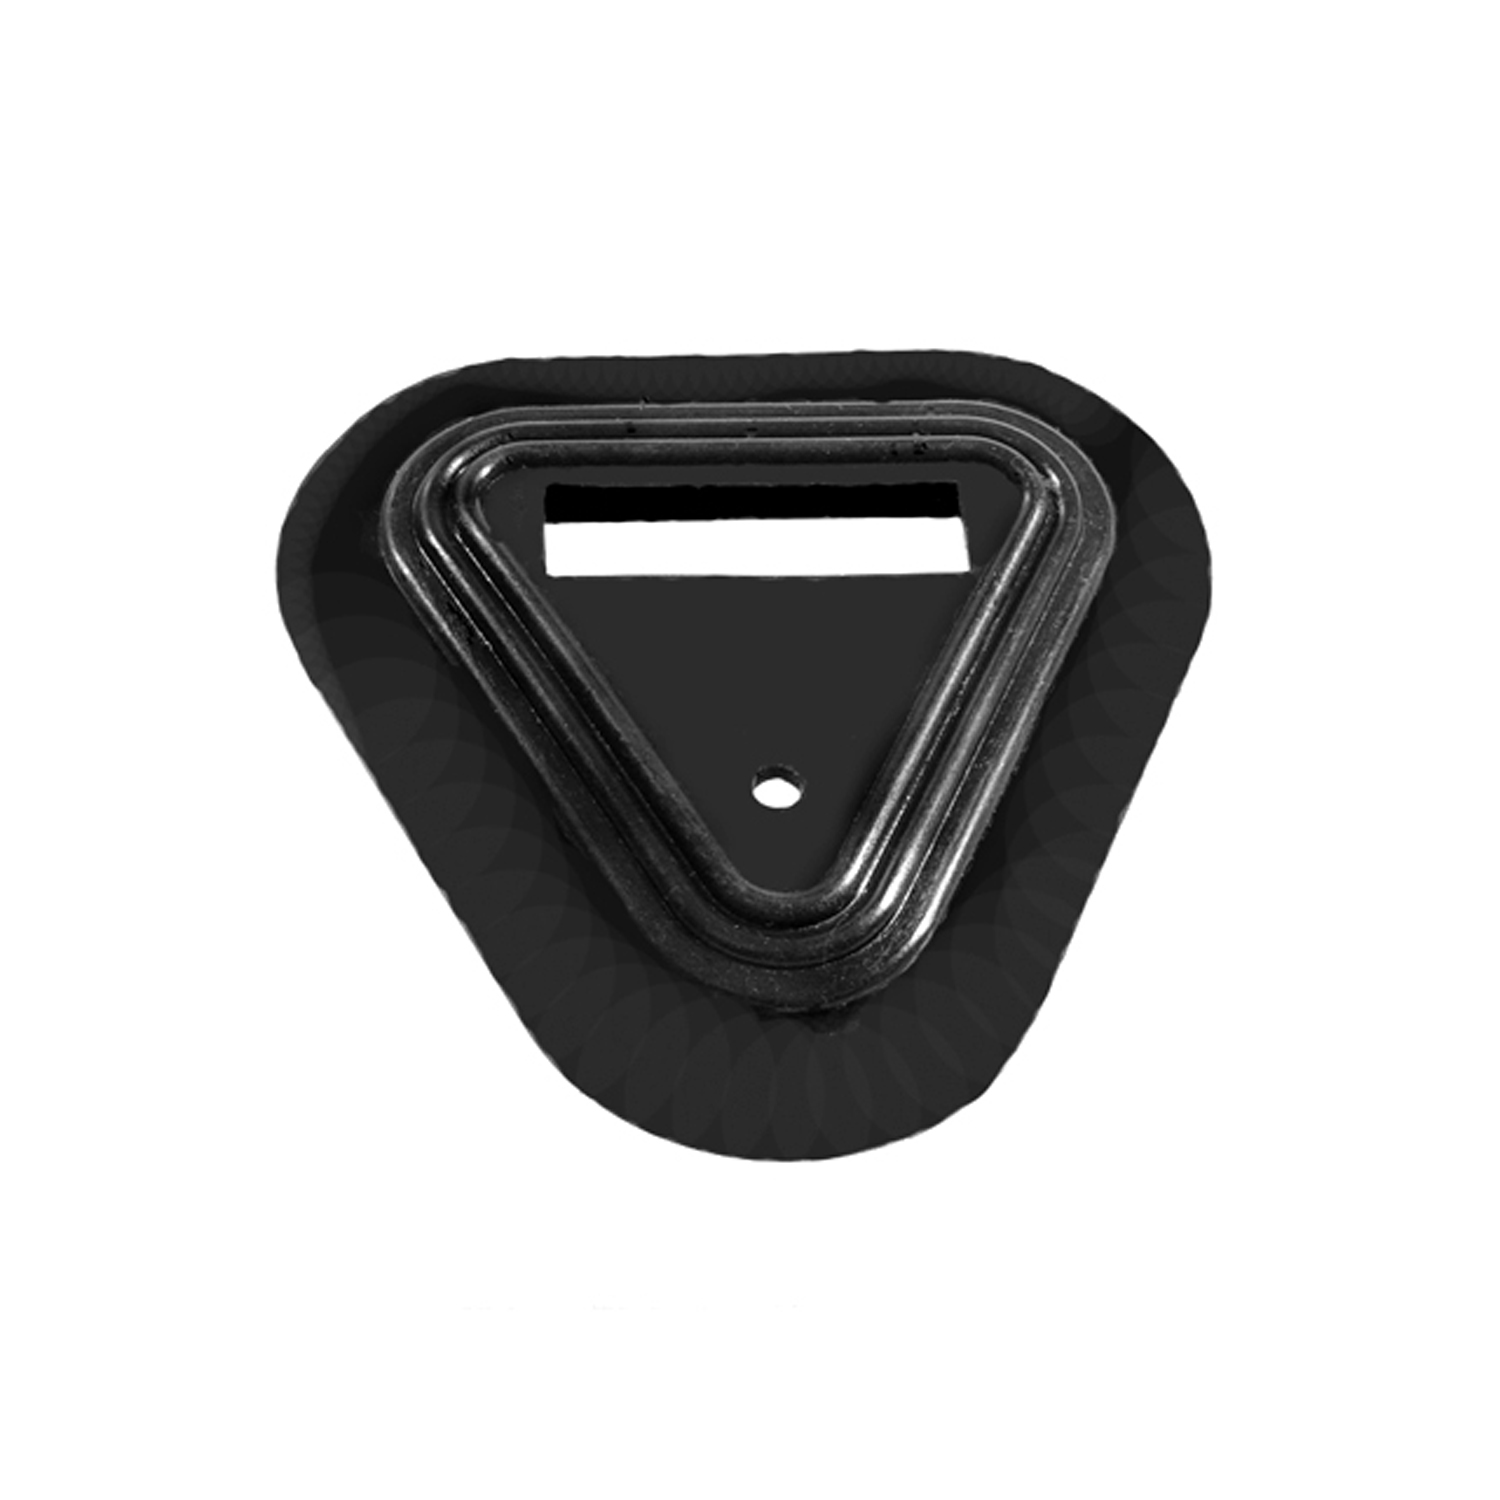 1955 Chevrolet One-Fifty Series Accelerator Pedal Pad Trim Grommet.  Black, Rubber-SM 79-A